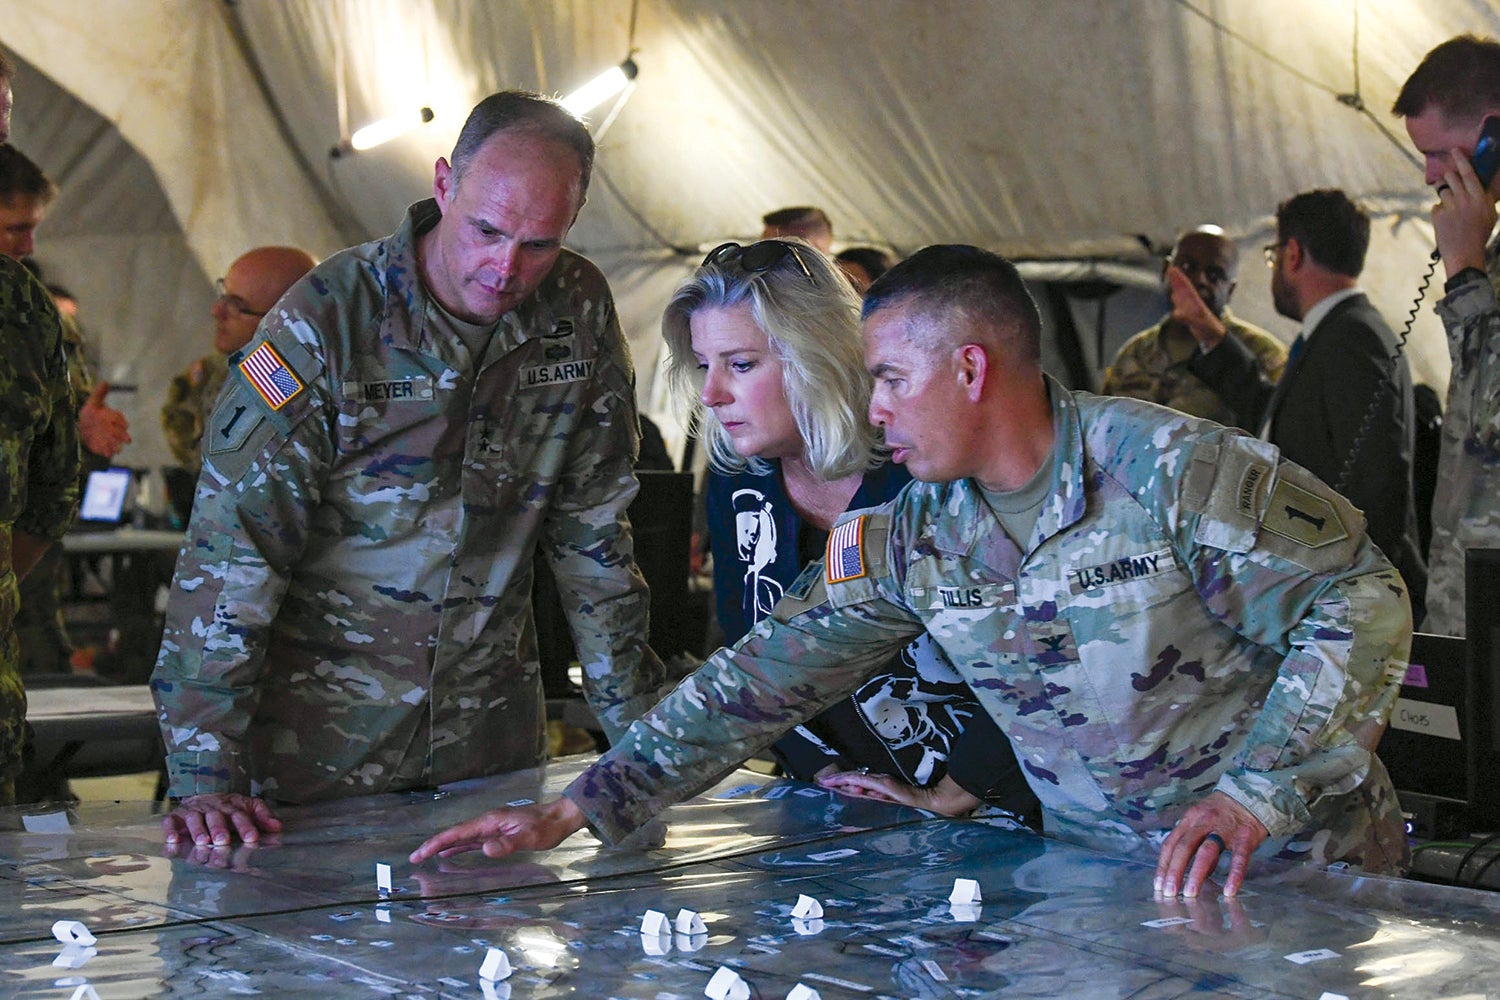 Army Secretary Christine Wormuth takes in a command post exercise featuring the 1st Infantry Division and Estonian armed forces at Fort Riley, Kansas. (Credit: U.S. Army/Sgt. David Resnick)